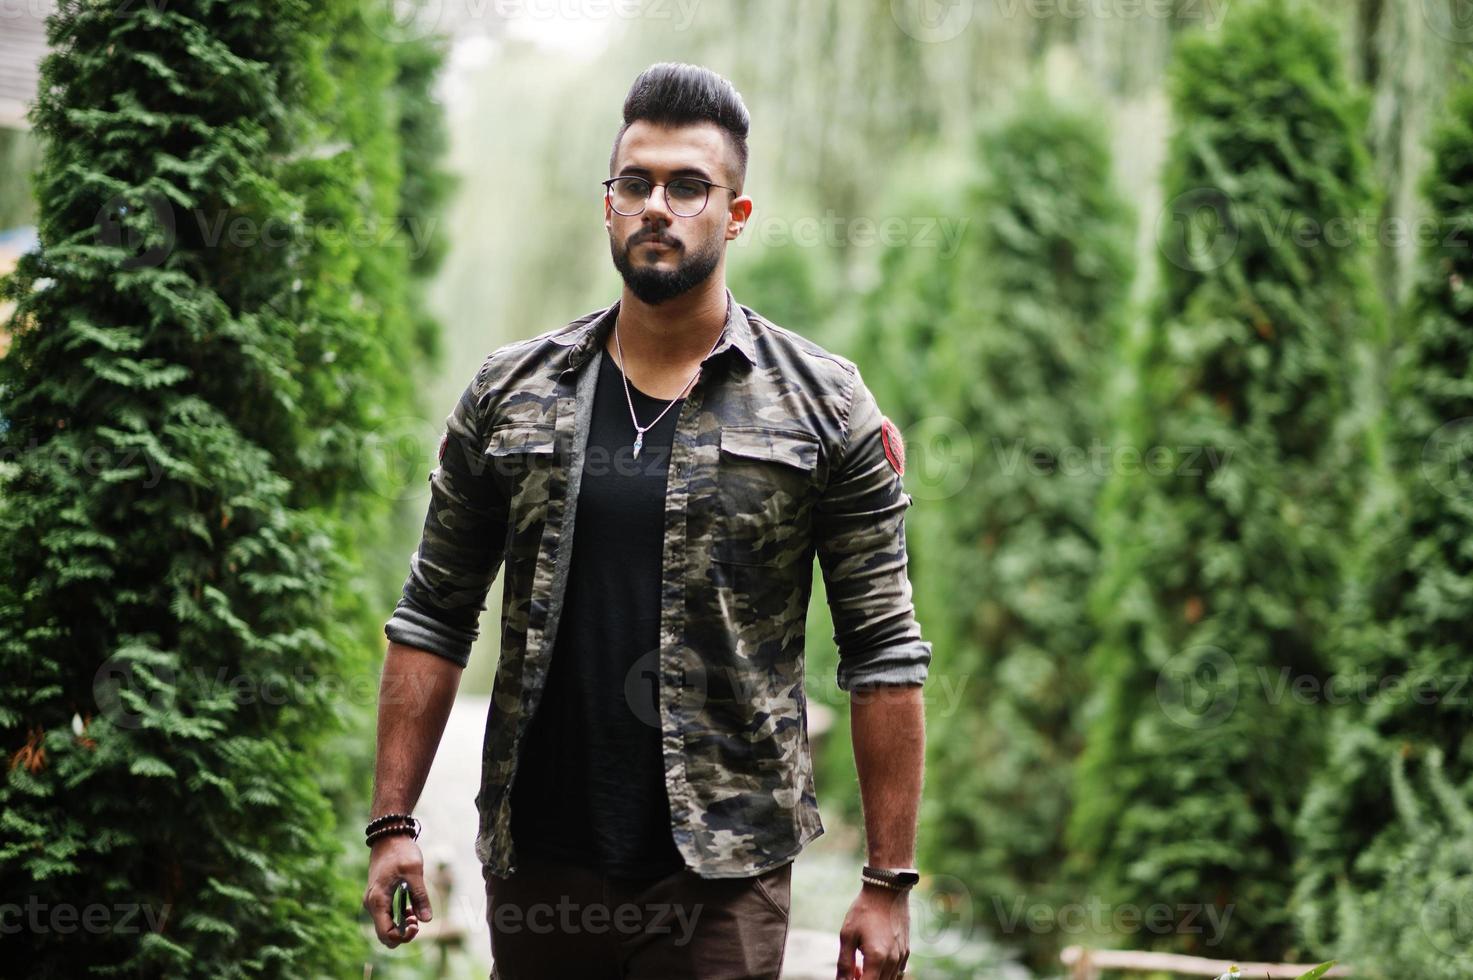 Awesome beautiful tall ararbian beard macho man in glasses and military jacket posed outdoor. photo